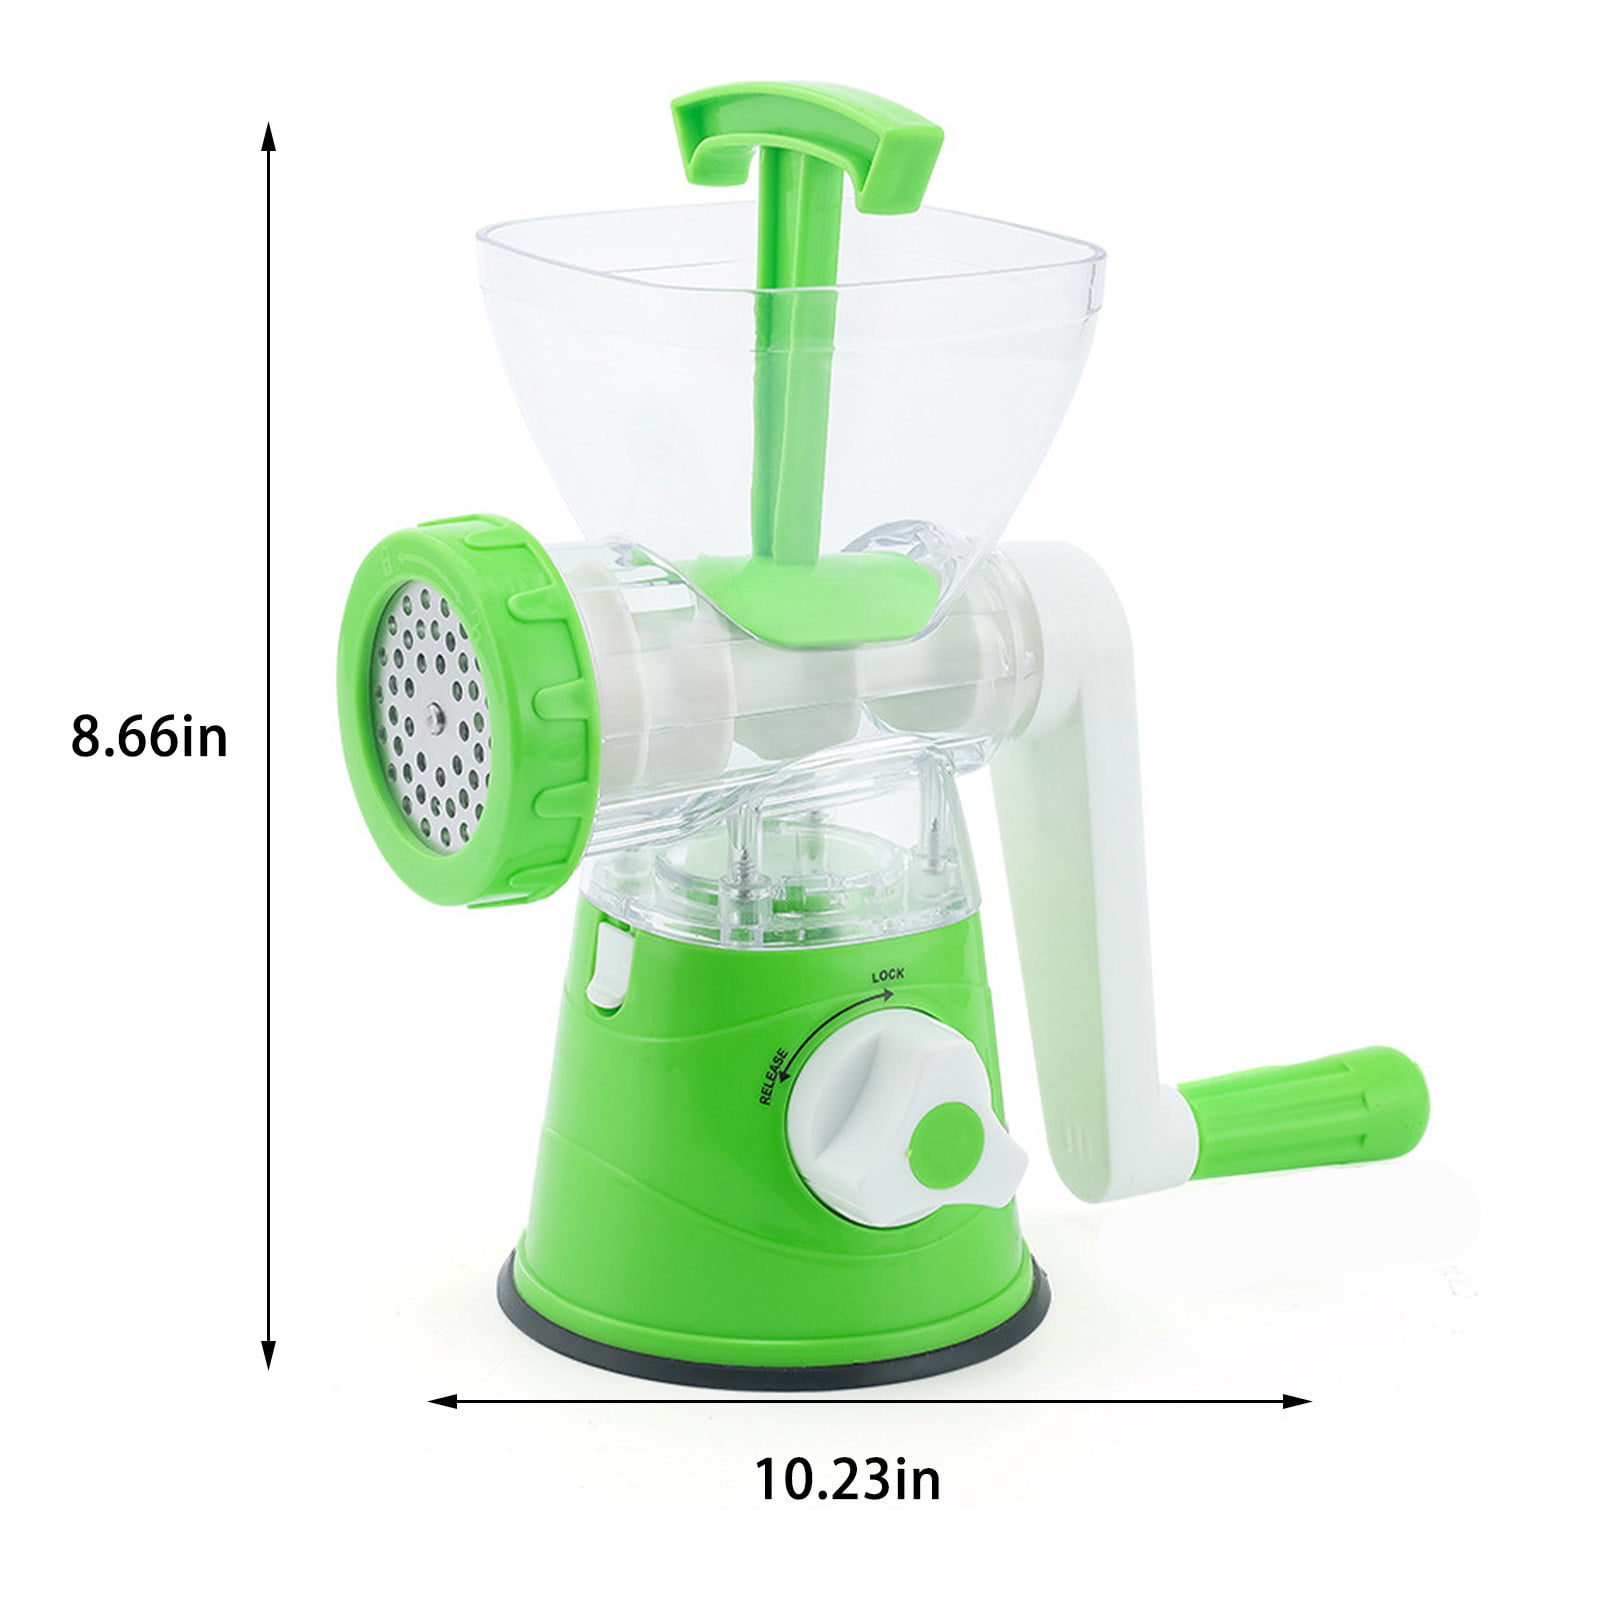 Flyseago Meat Grinder Manual Stainless Steel Food Grinding Machine Sausage  Stuffer Hand Cranked Filler Mincer Chopper for Home Use Ground Beef